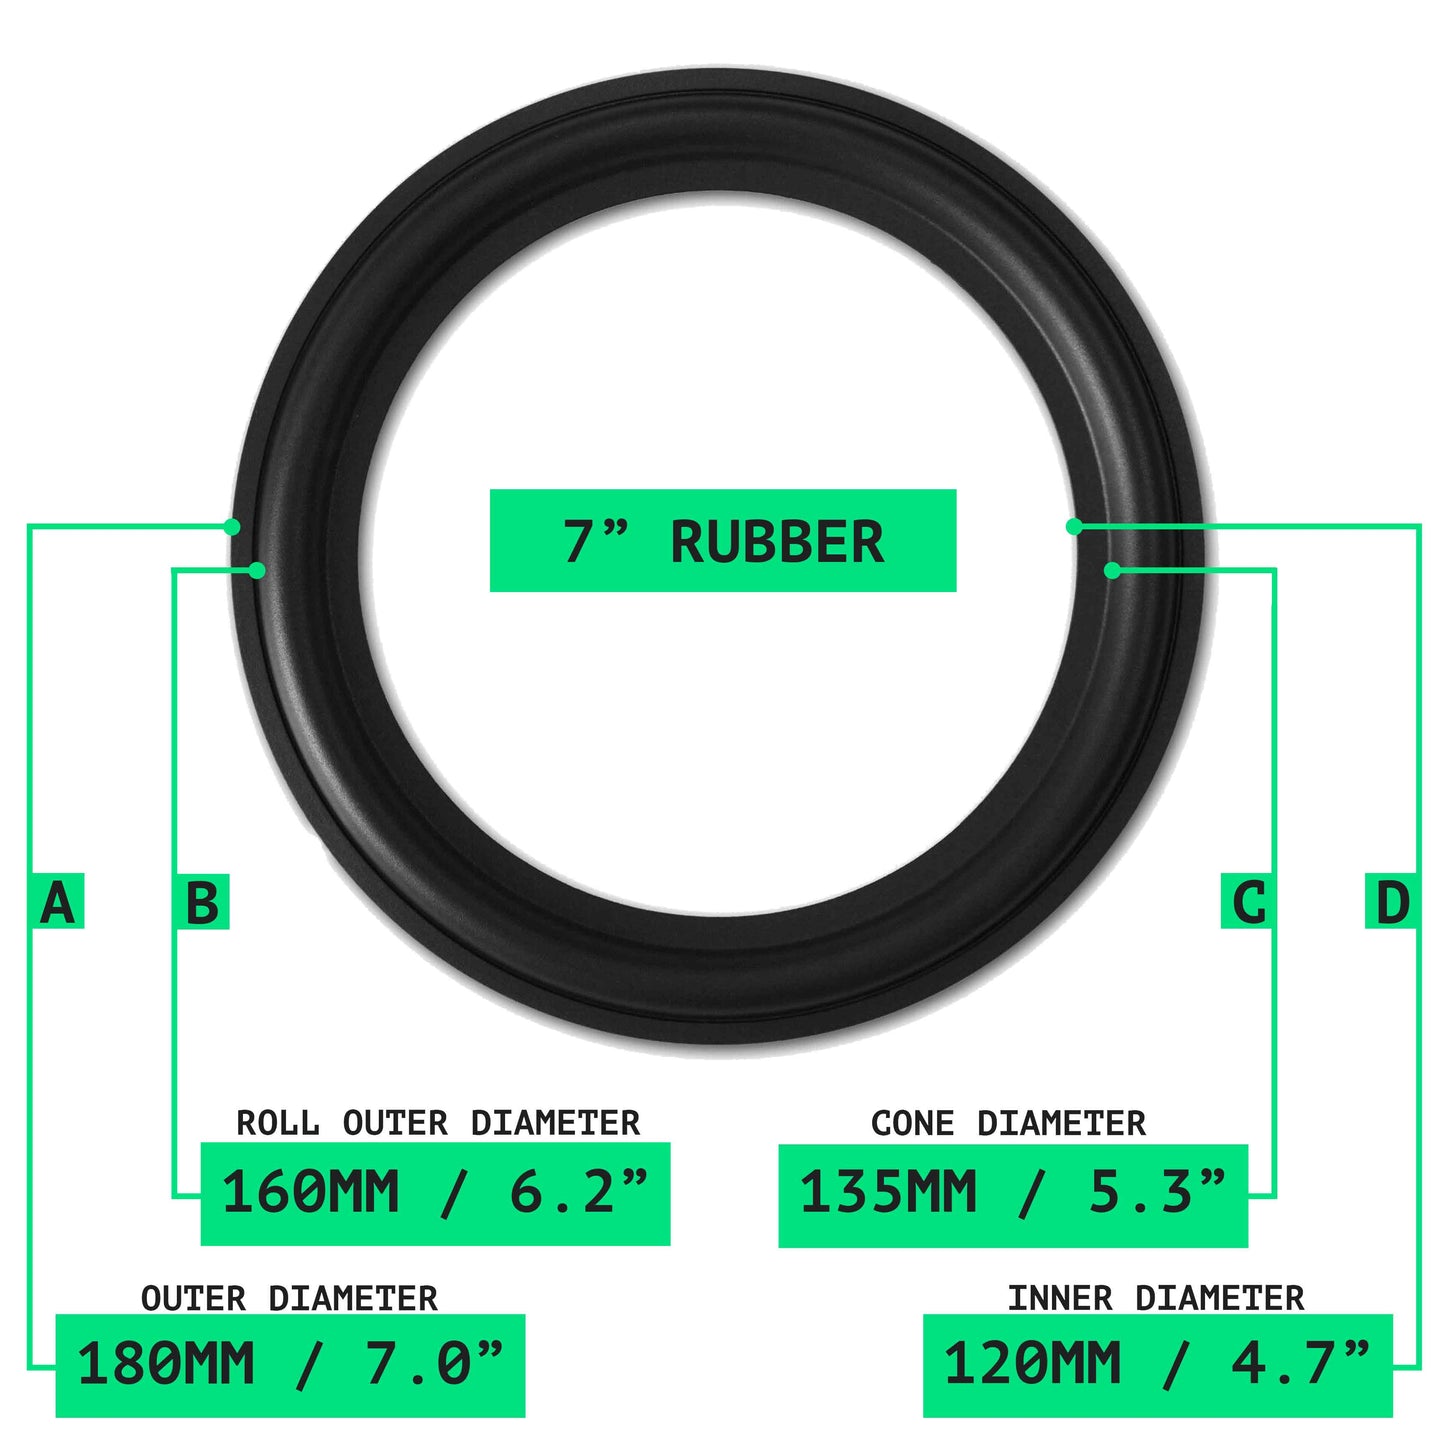 7" Rubber Surround - OD:180MM ID:120MM